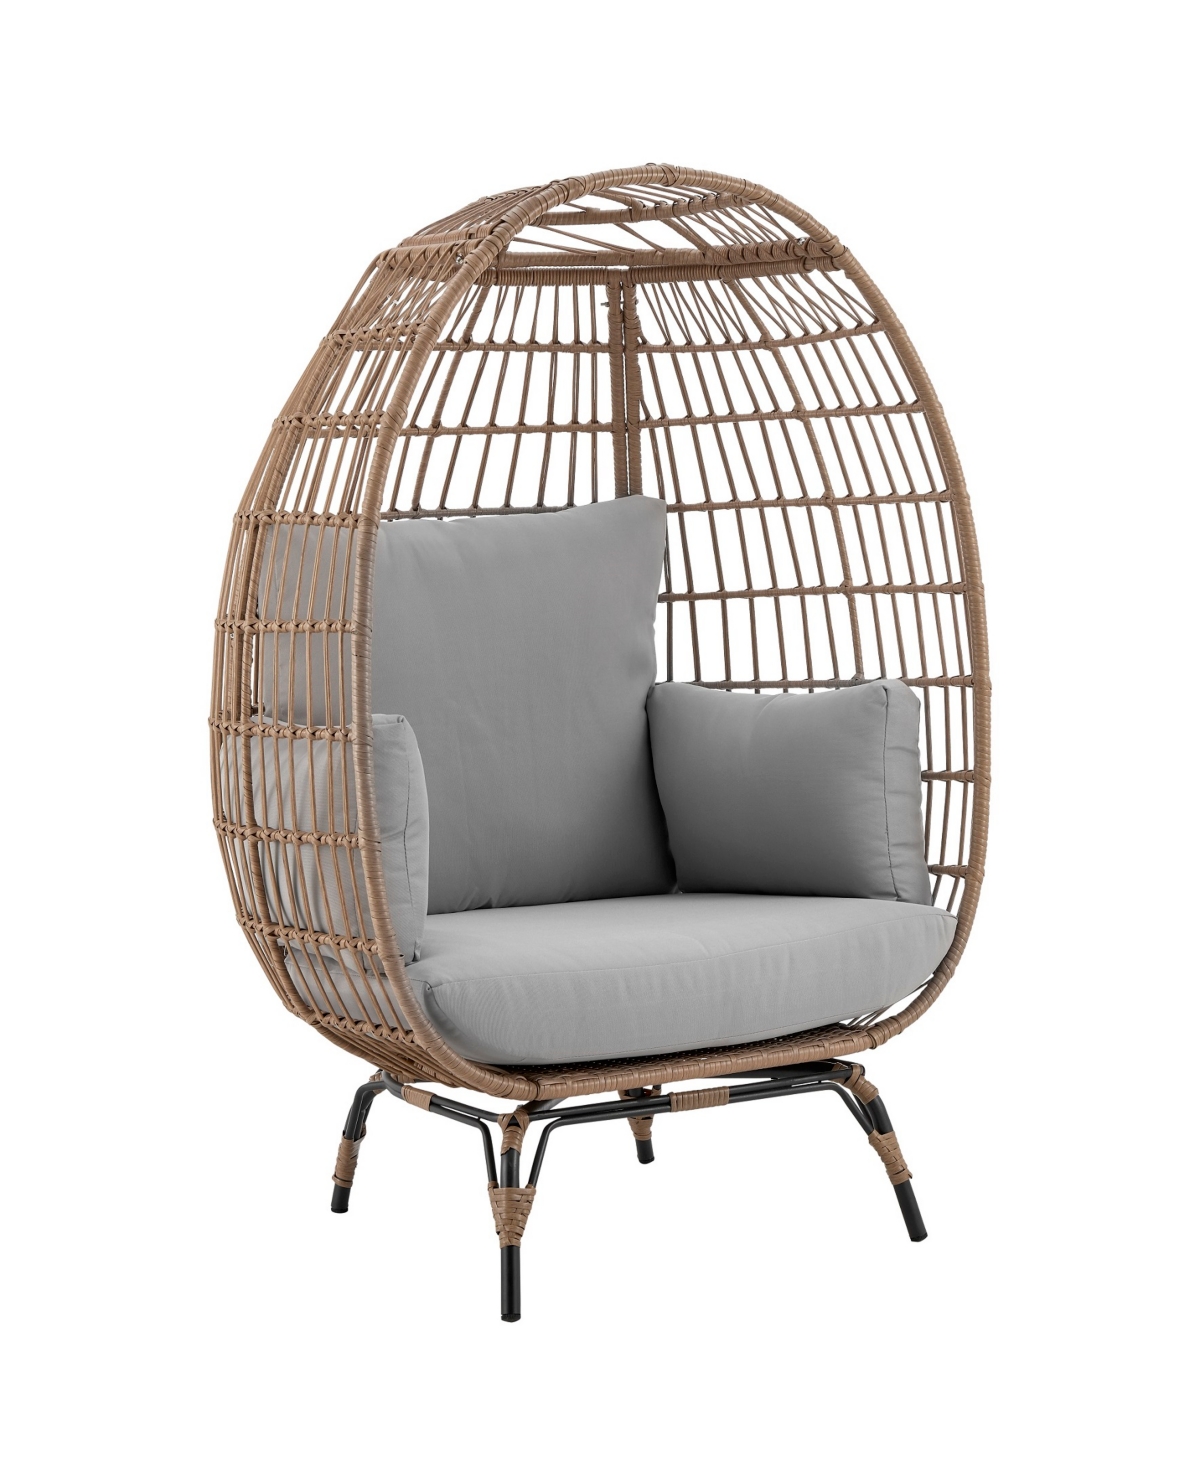 Manhattan Comfort 33.46" Spezia Steel Polyester Upholstered Freestanding Egg Chair In Tan And Gray